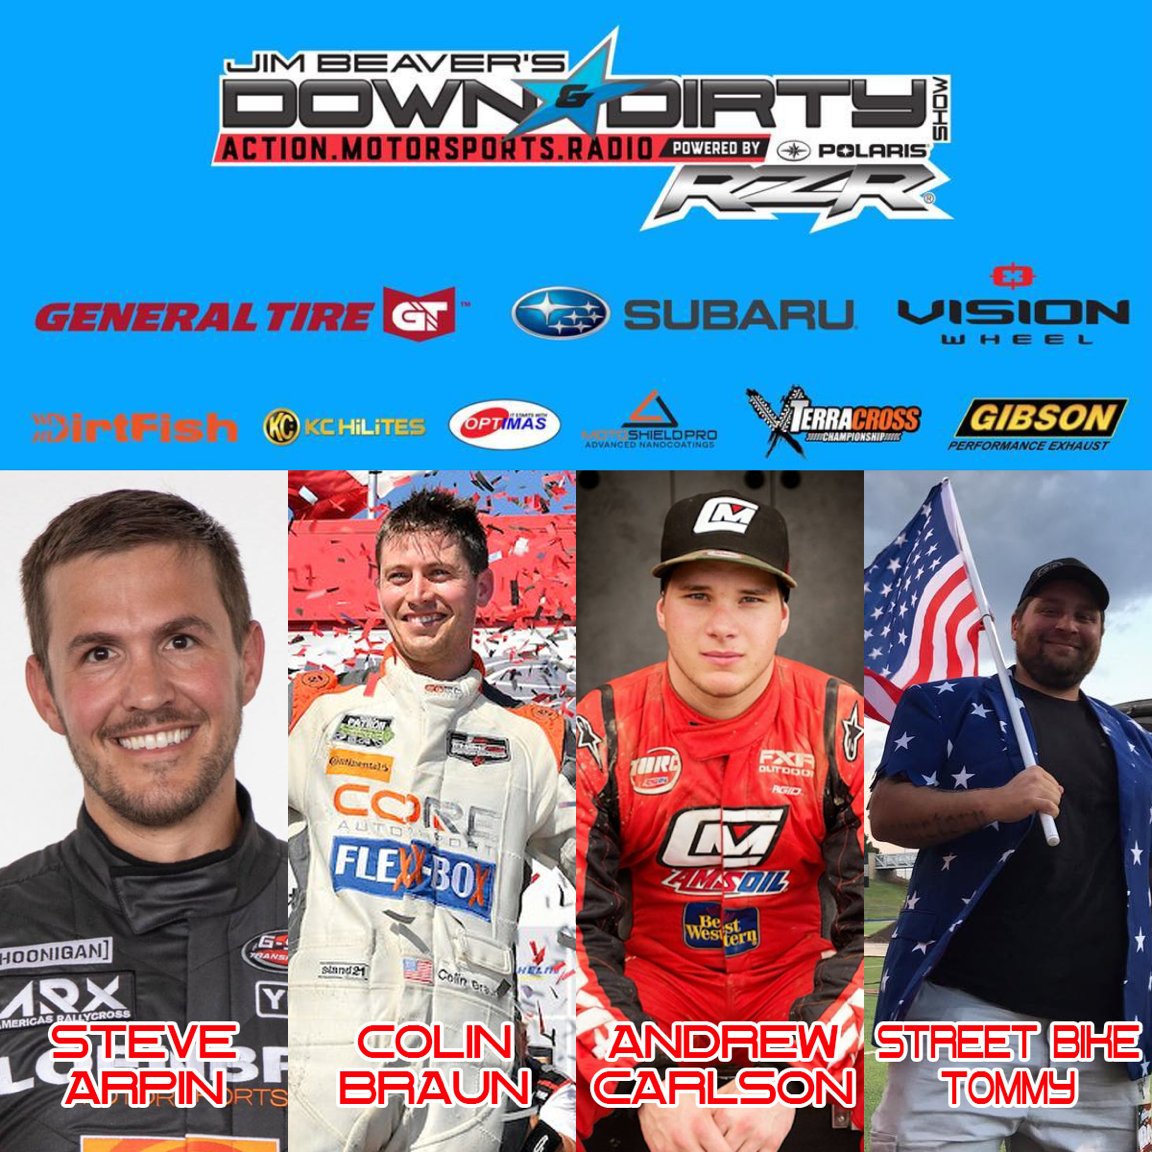 RT JimBeaver15: Today's Down & Dirty Radio Show Powered By PolarisRZR lineup:

StreetBikeTommy
colinbraun from COREautosport 
151Carlson talking MWShortCourse at ERXmotorpark 
stevearpin from LoenbroRacing talking ARXRallycross 

Hit the link at & tune i…